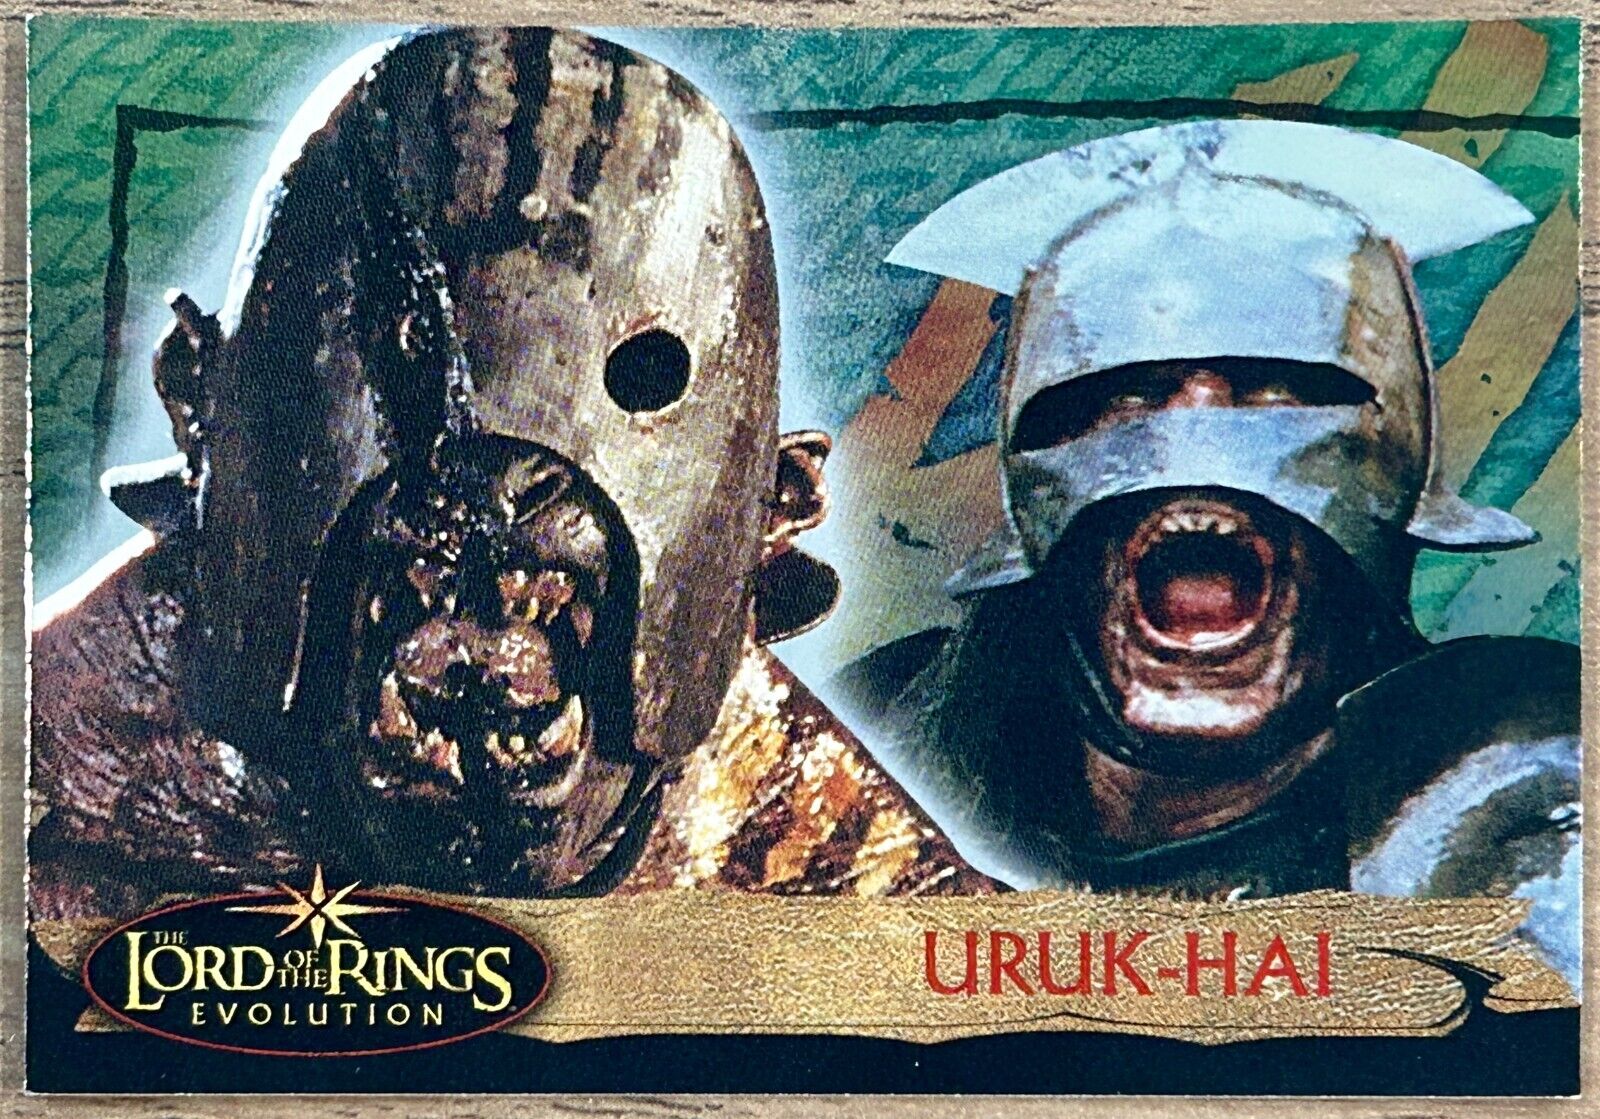 2006 Topps (LORD of the RINGS EVOLUTION) Uruk-HAI #61 - NEAR MINT+ Cond